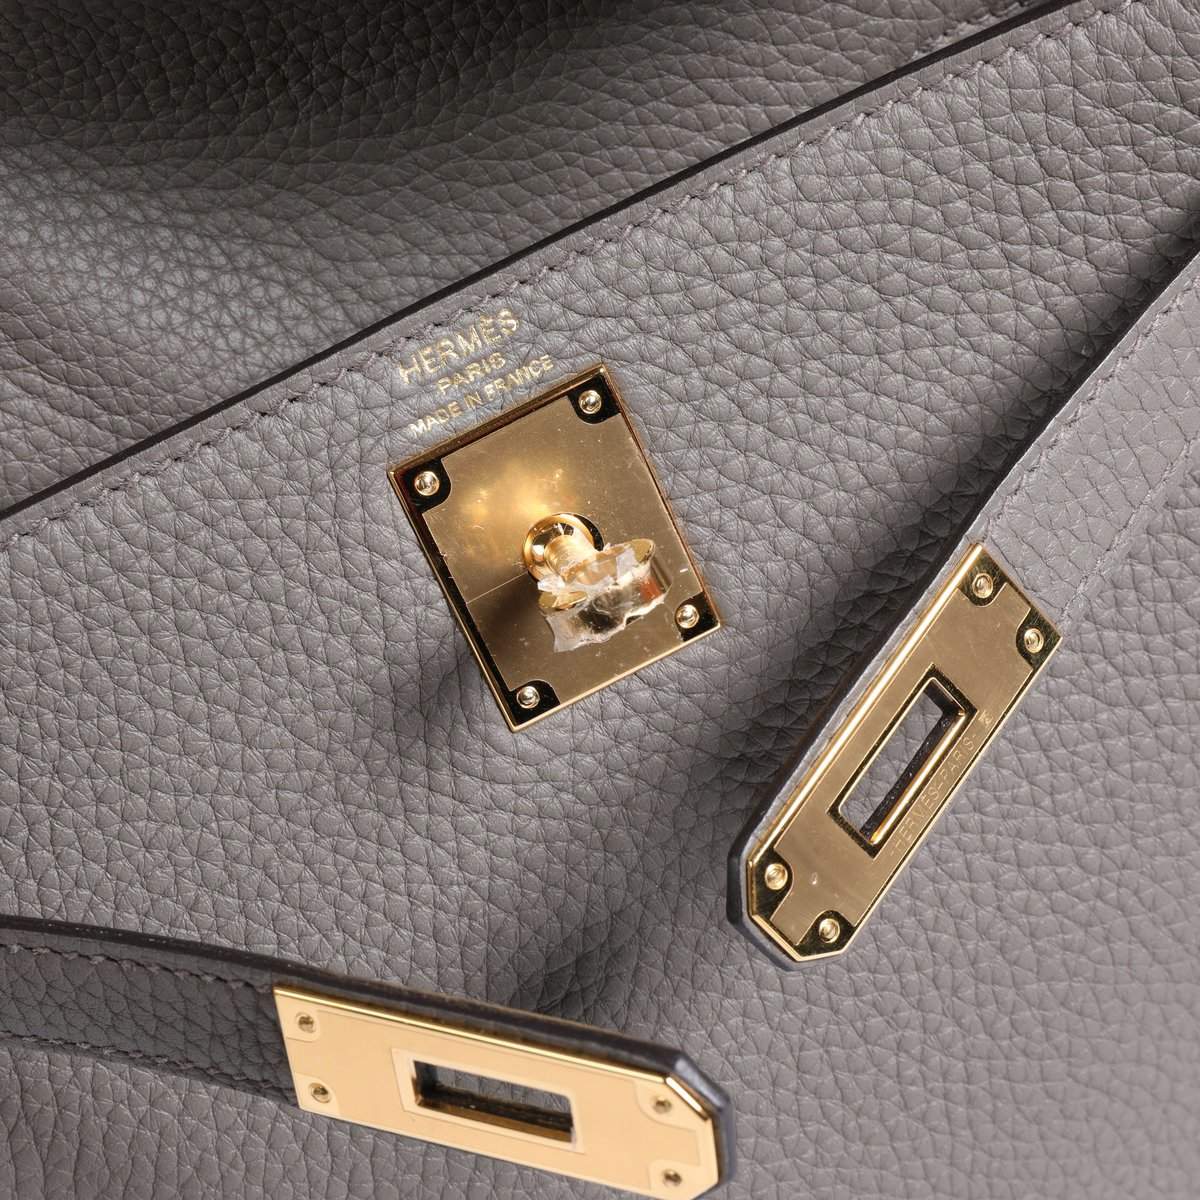 HERMES Kelly Ado II Backpack Etoupe Clemence GHW - Timeless Luxuries